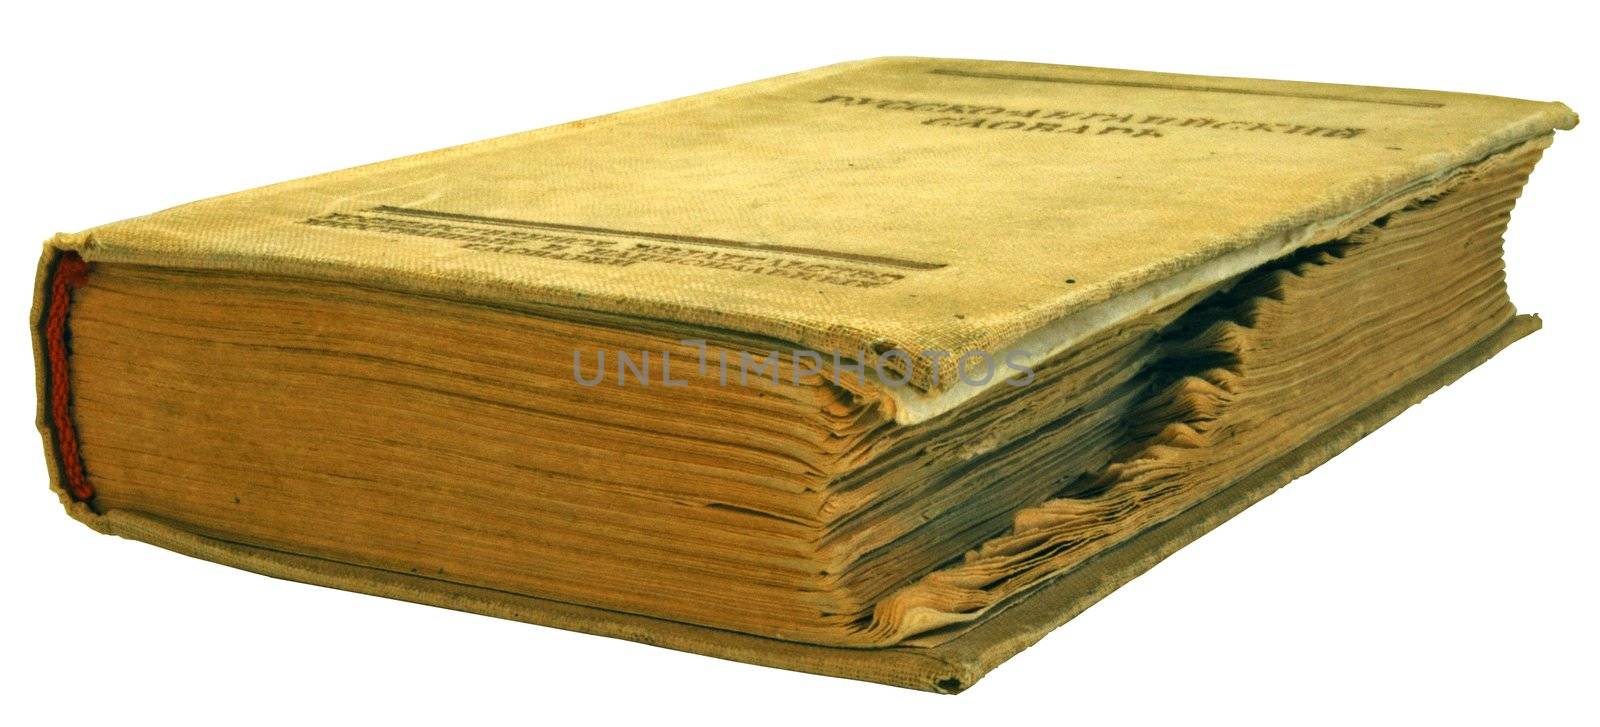 age-old Russian-English dictionary, isolated on a white background